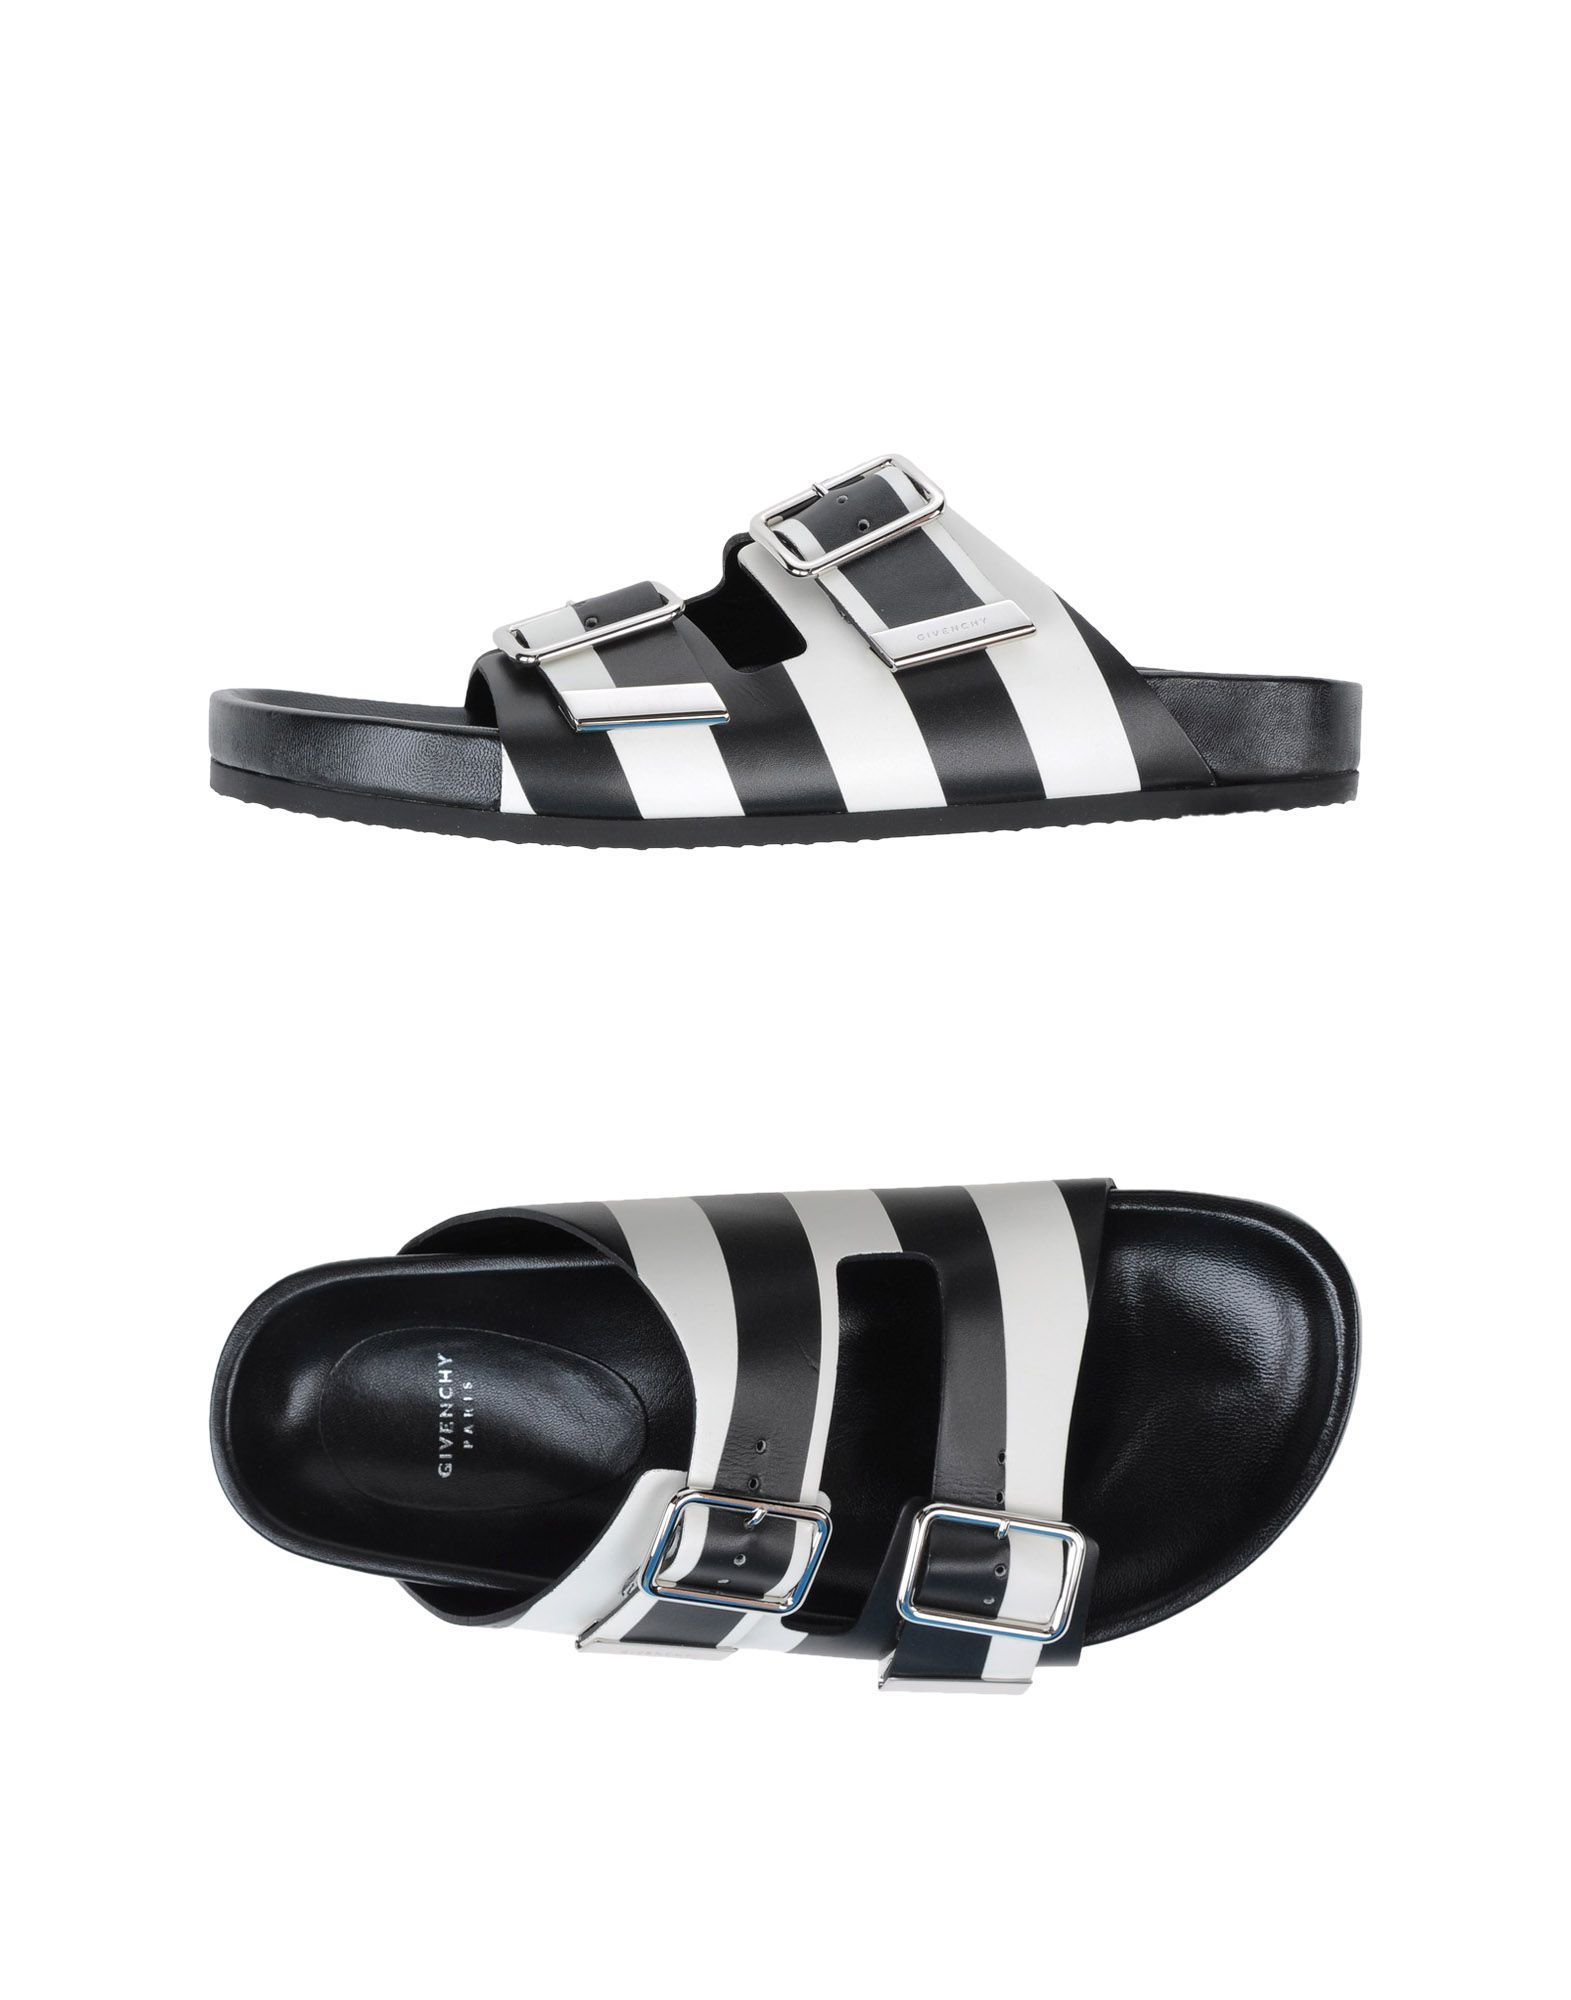 GIVENCHY Sandals | YOOX (US)